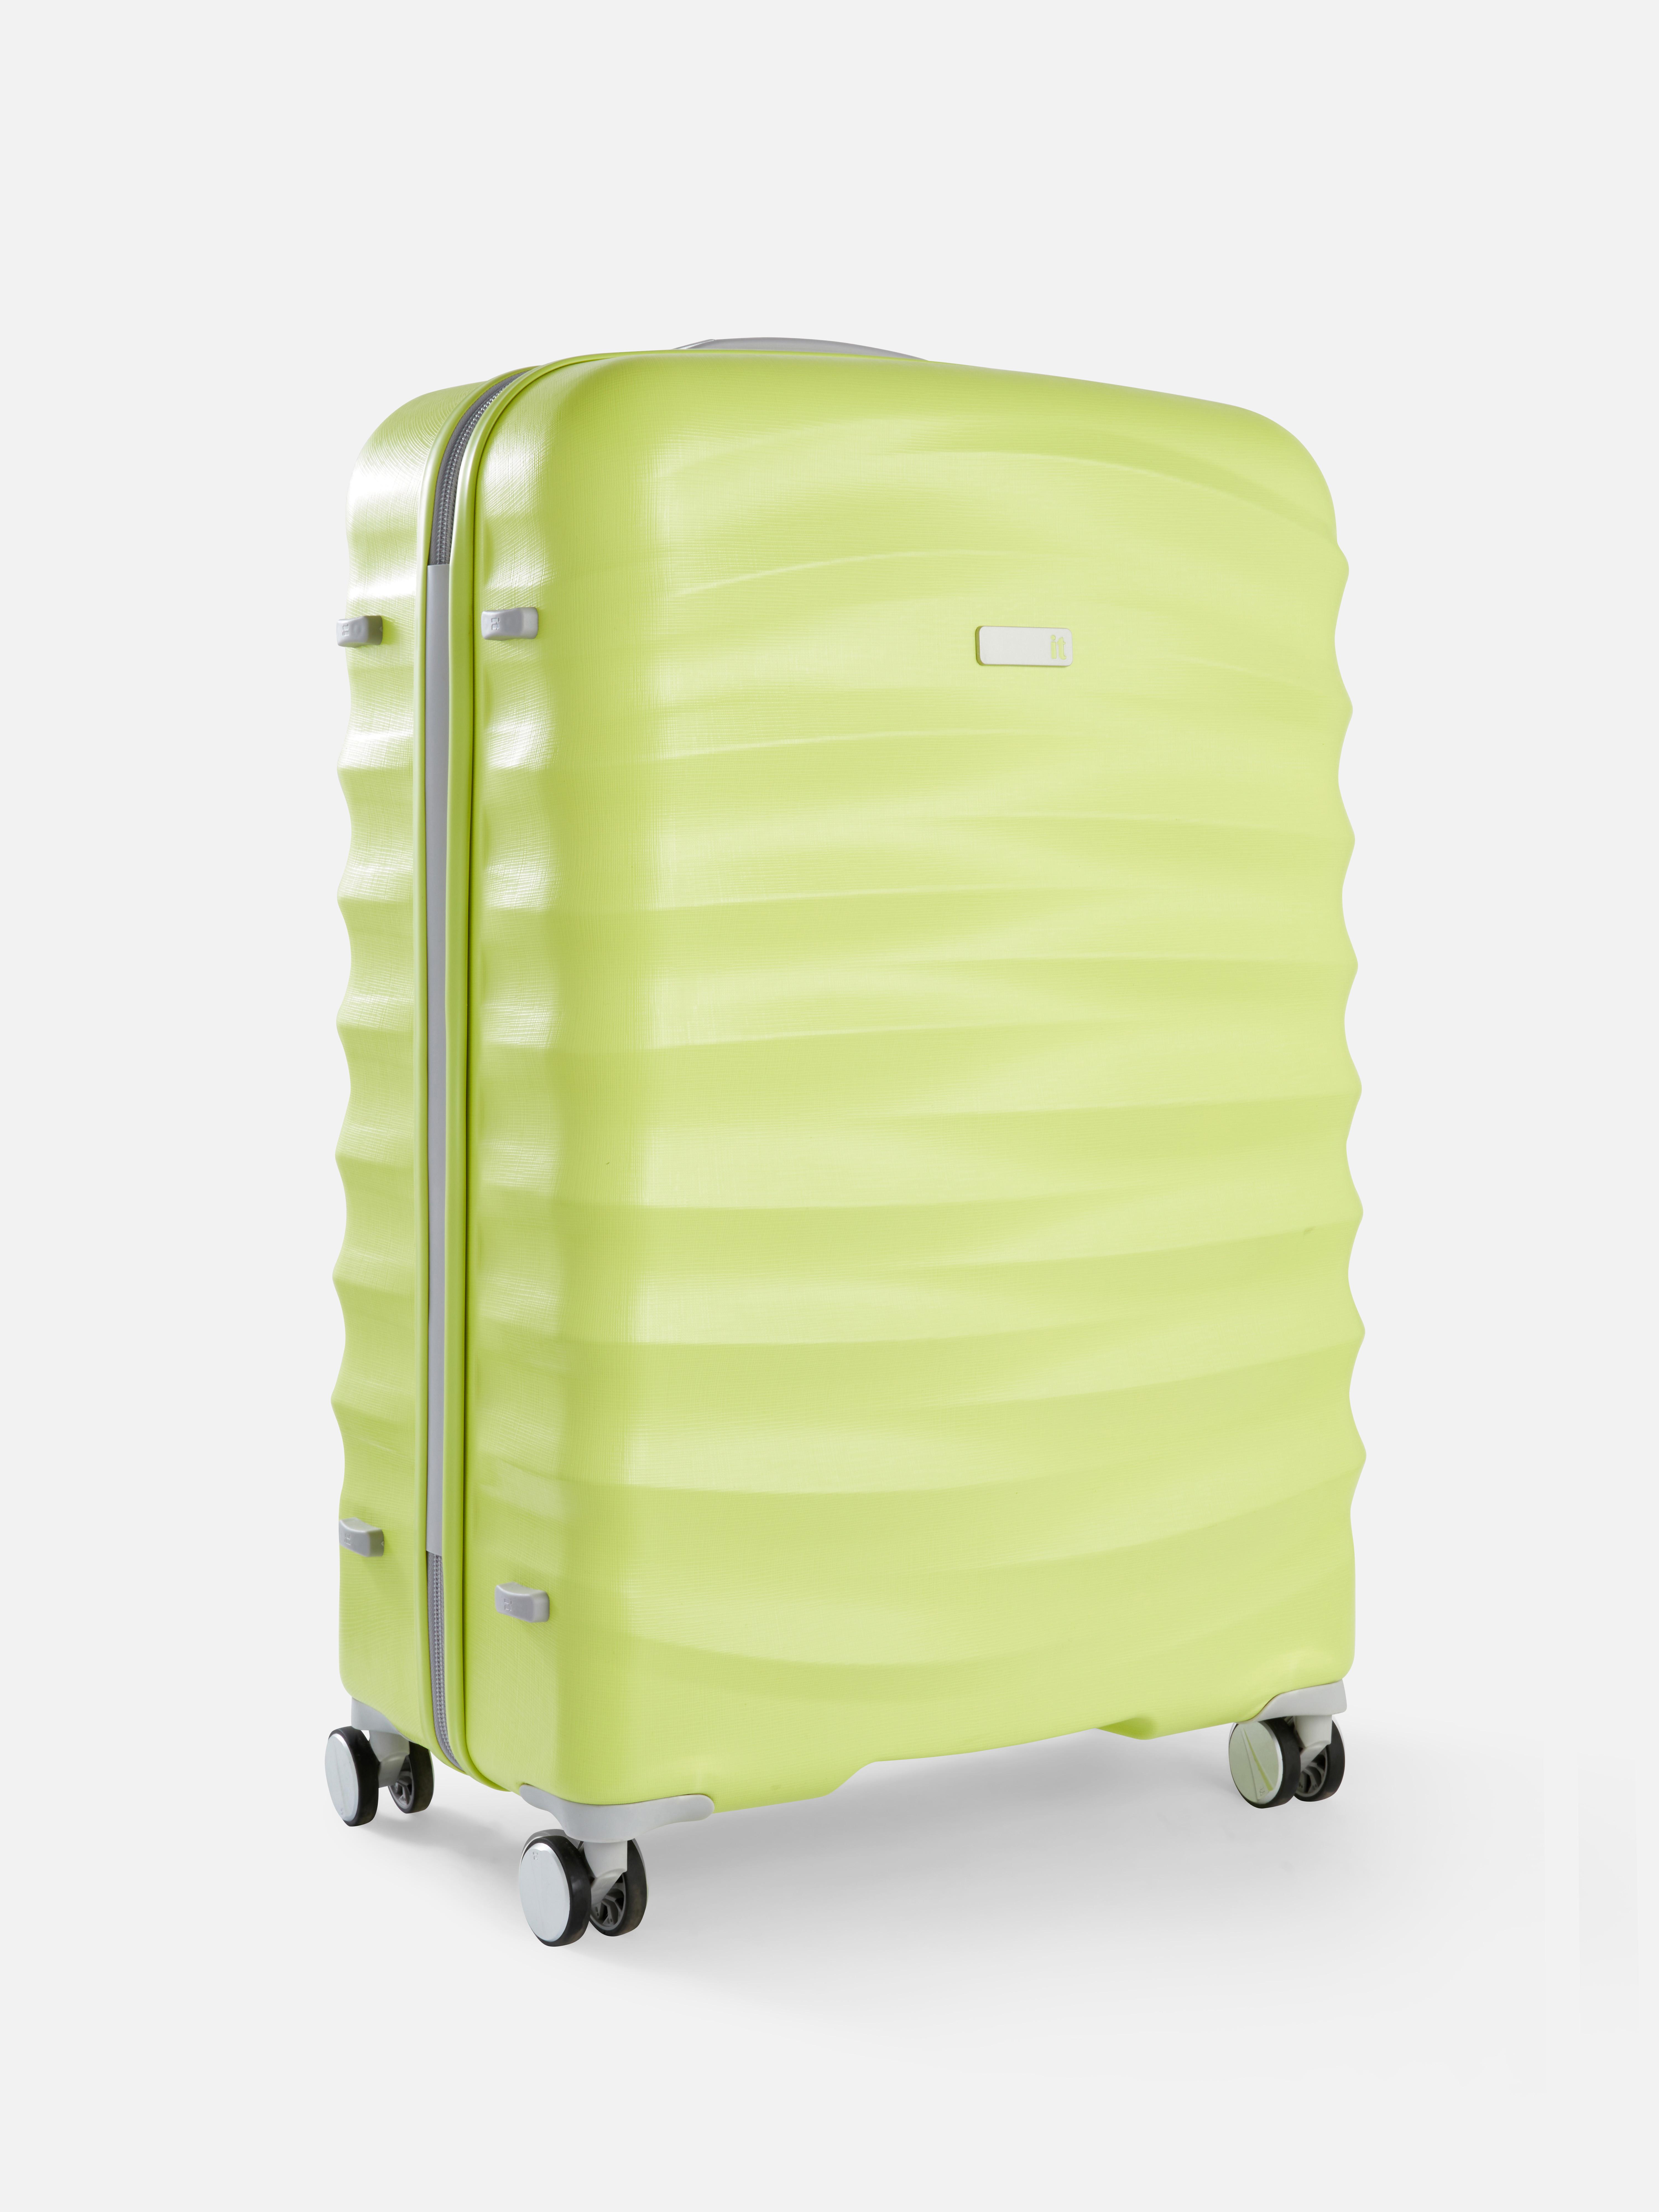 it Luggage Textured Hard Shell Suitcase